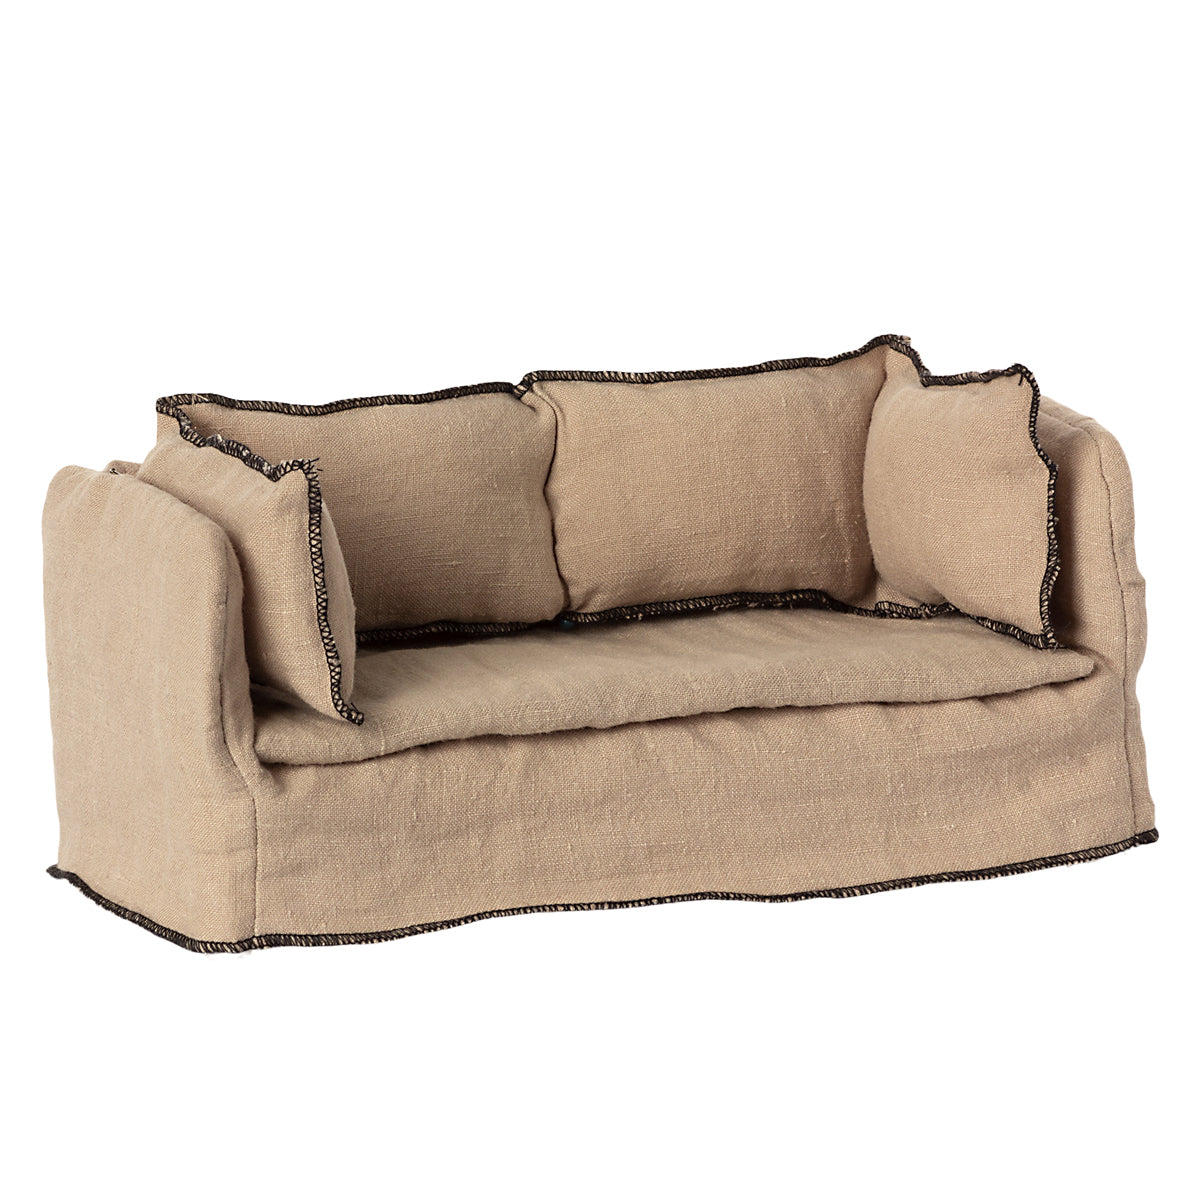 Maileg Miniature Couch 11-1306-00